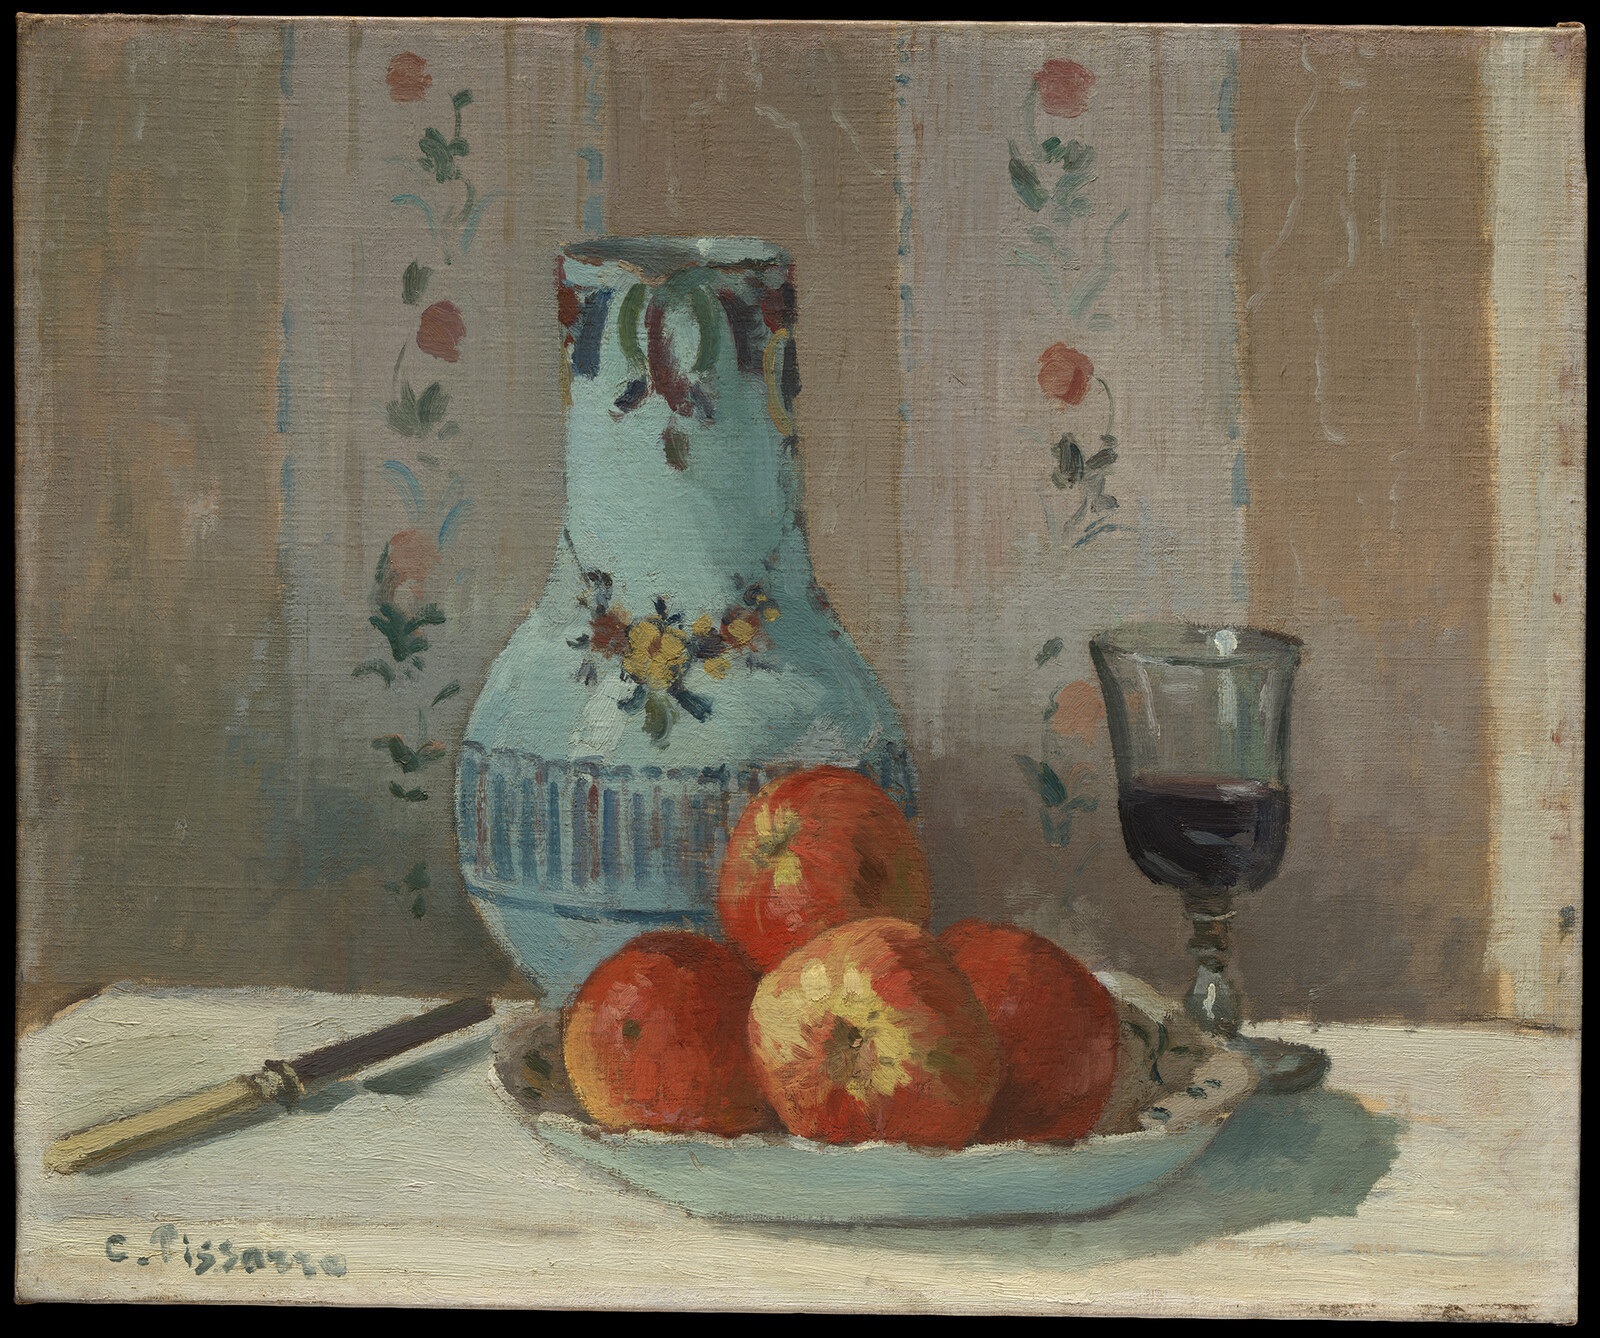 Reference ('Still Life with Apples and Pitcher' - Camille Pissarro 1872)